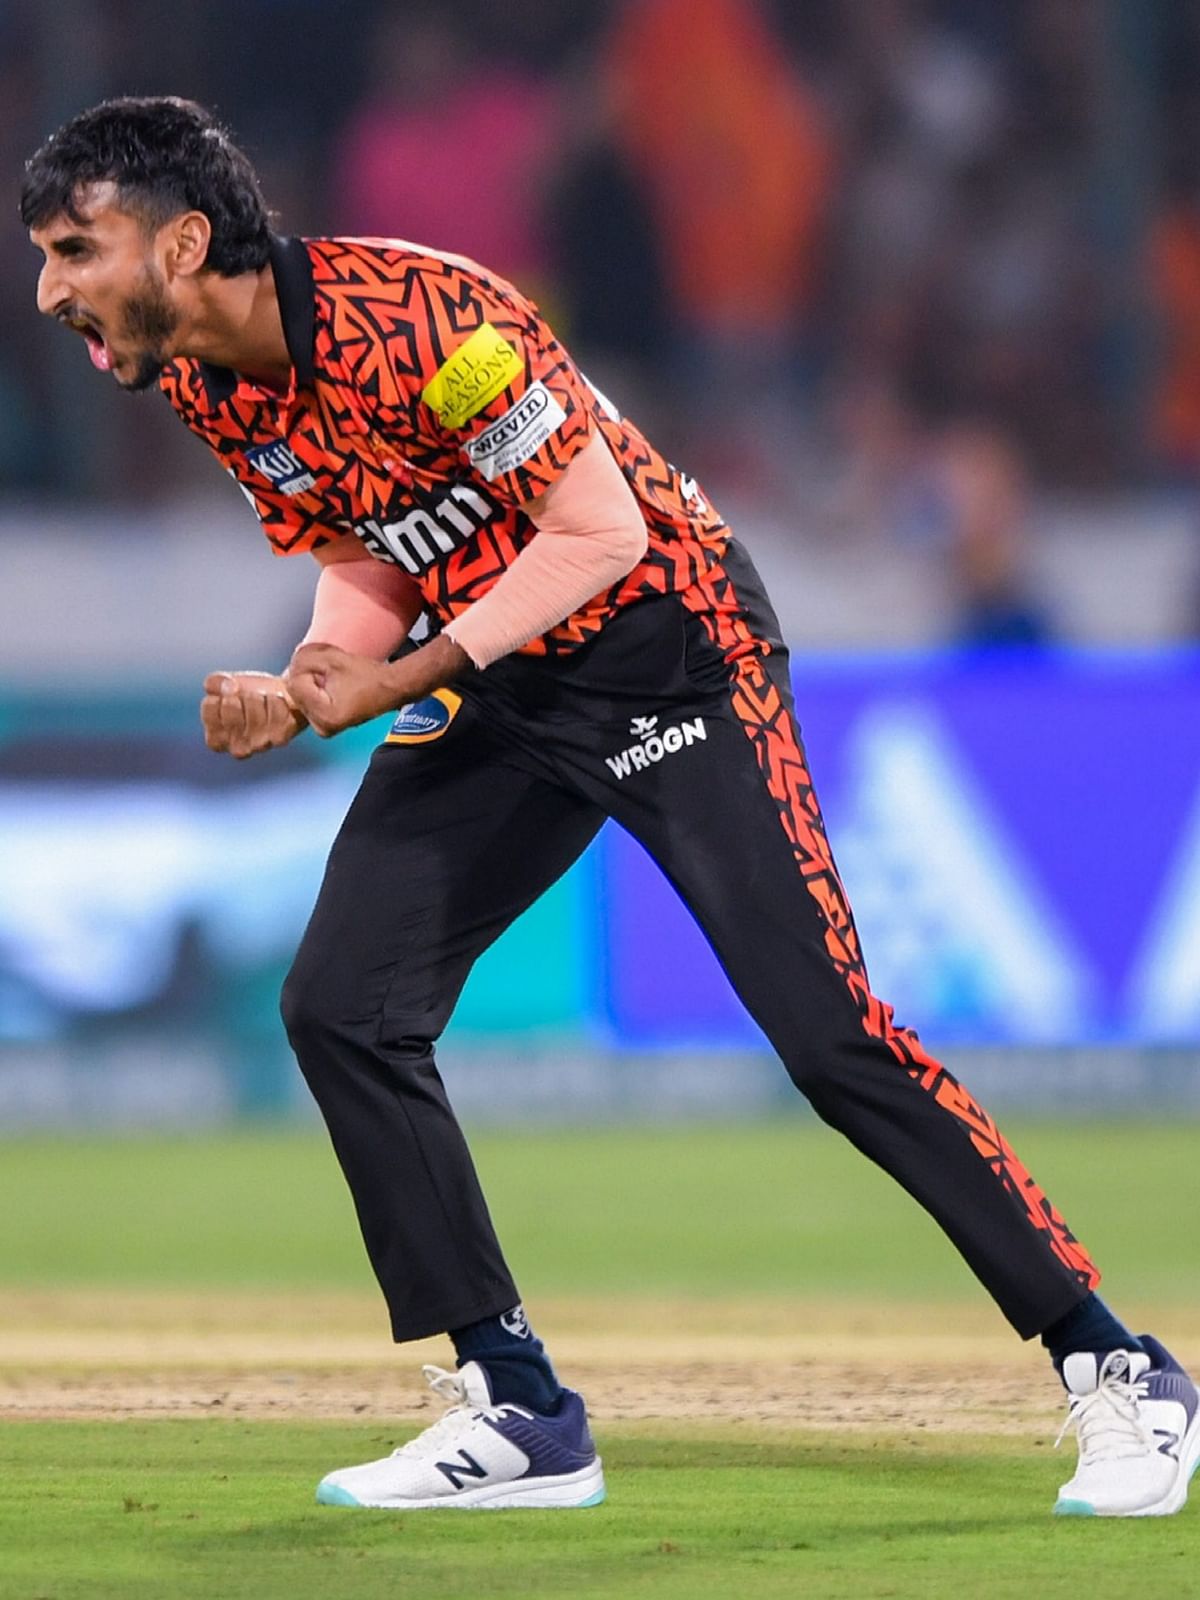 Chasing a mammoth total, Shahbaz Ahmed bowled tight line and length, making it difficult for MI to produce quick runs. He conceded 39 runs in his four overs and picked the crucial wicket of Ishan Kishan.